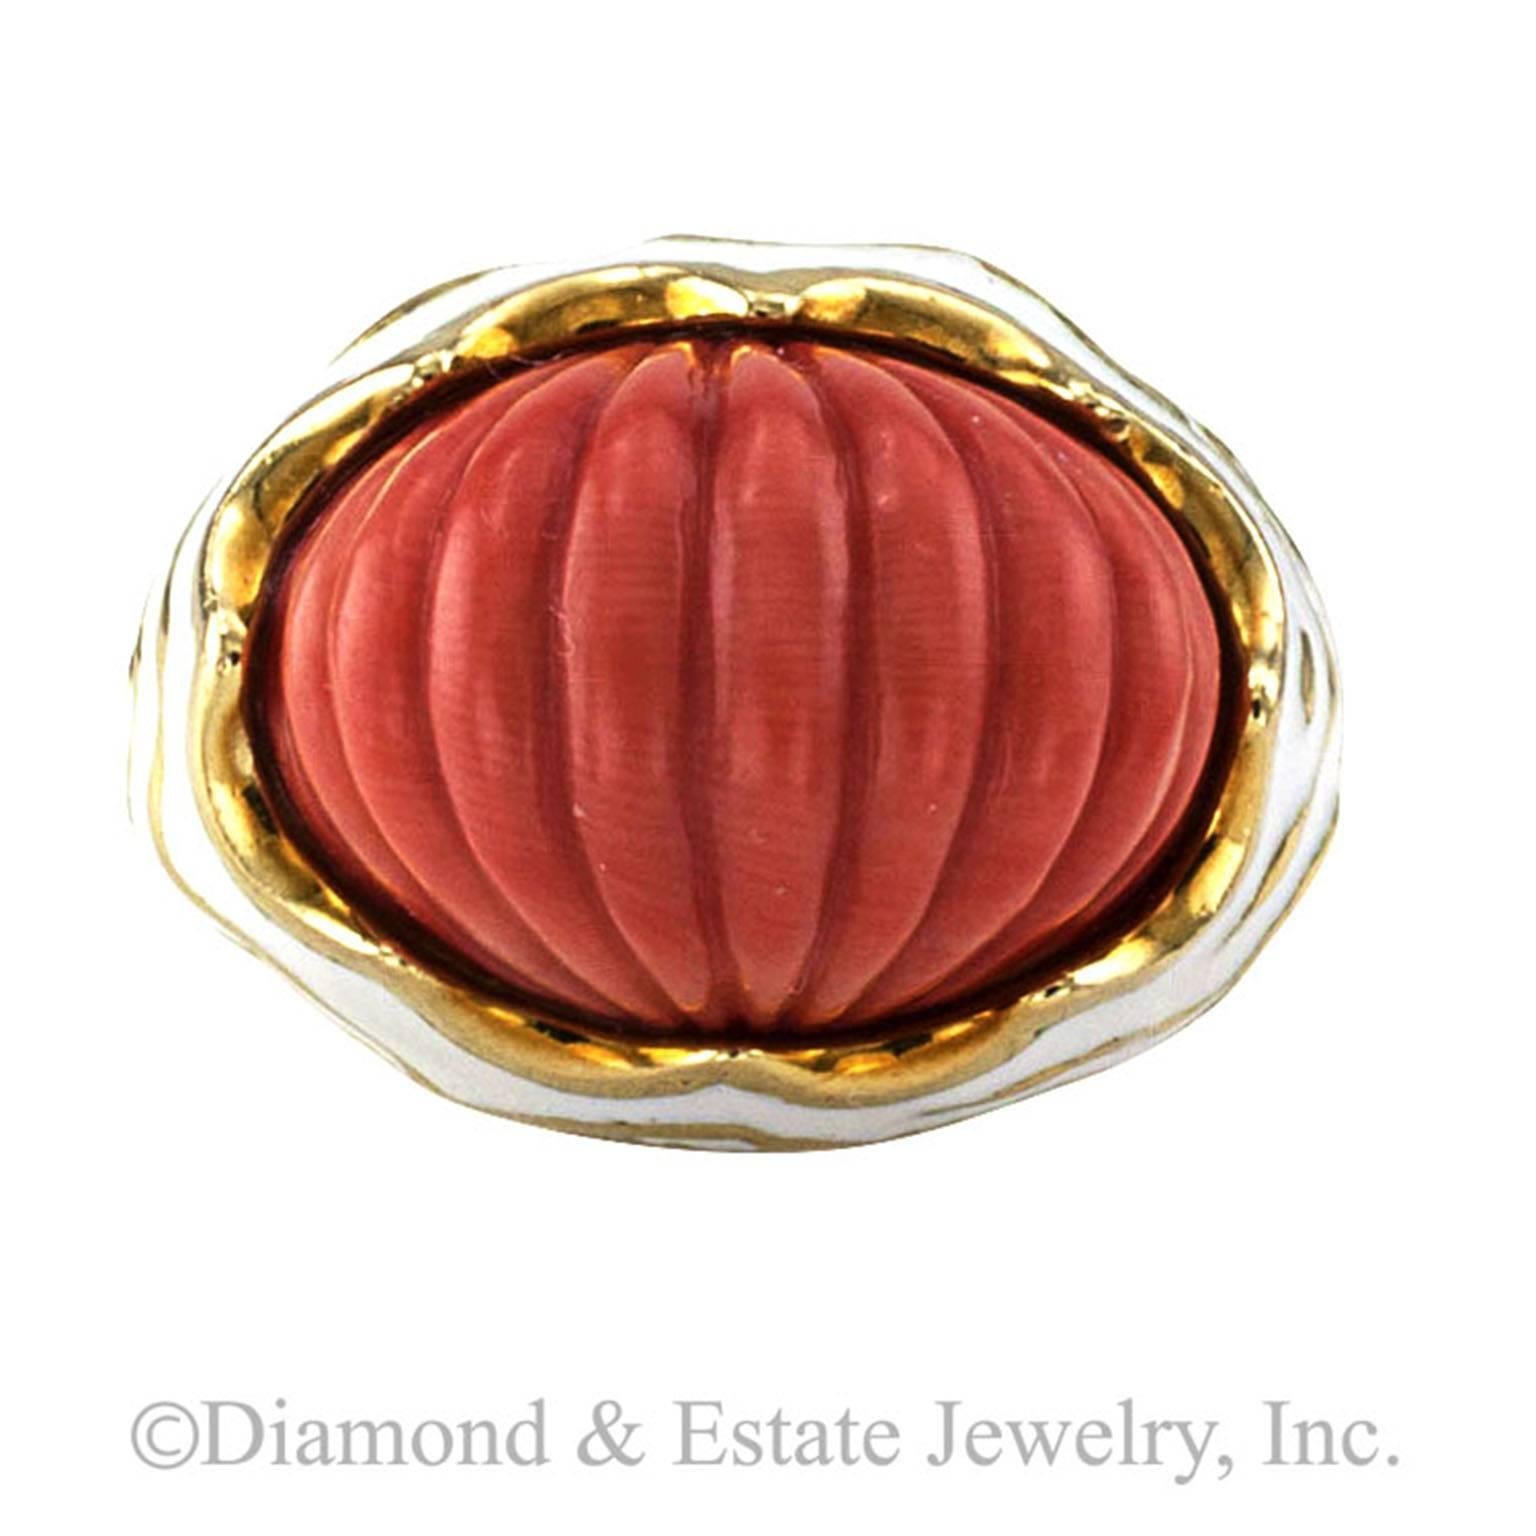 Coral White Enamel and 18 Karat Gold Artistic Ring

Art for art's sake, a flight of fancy... what a super cool ring to own!  It is difficult to contain the excitement describing something so different, so abstract... from the depths of a very